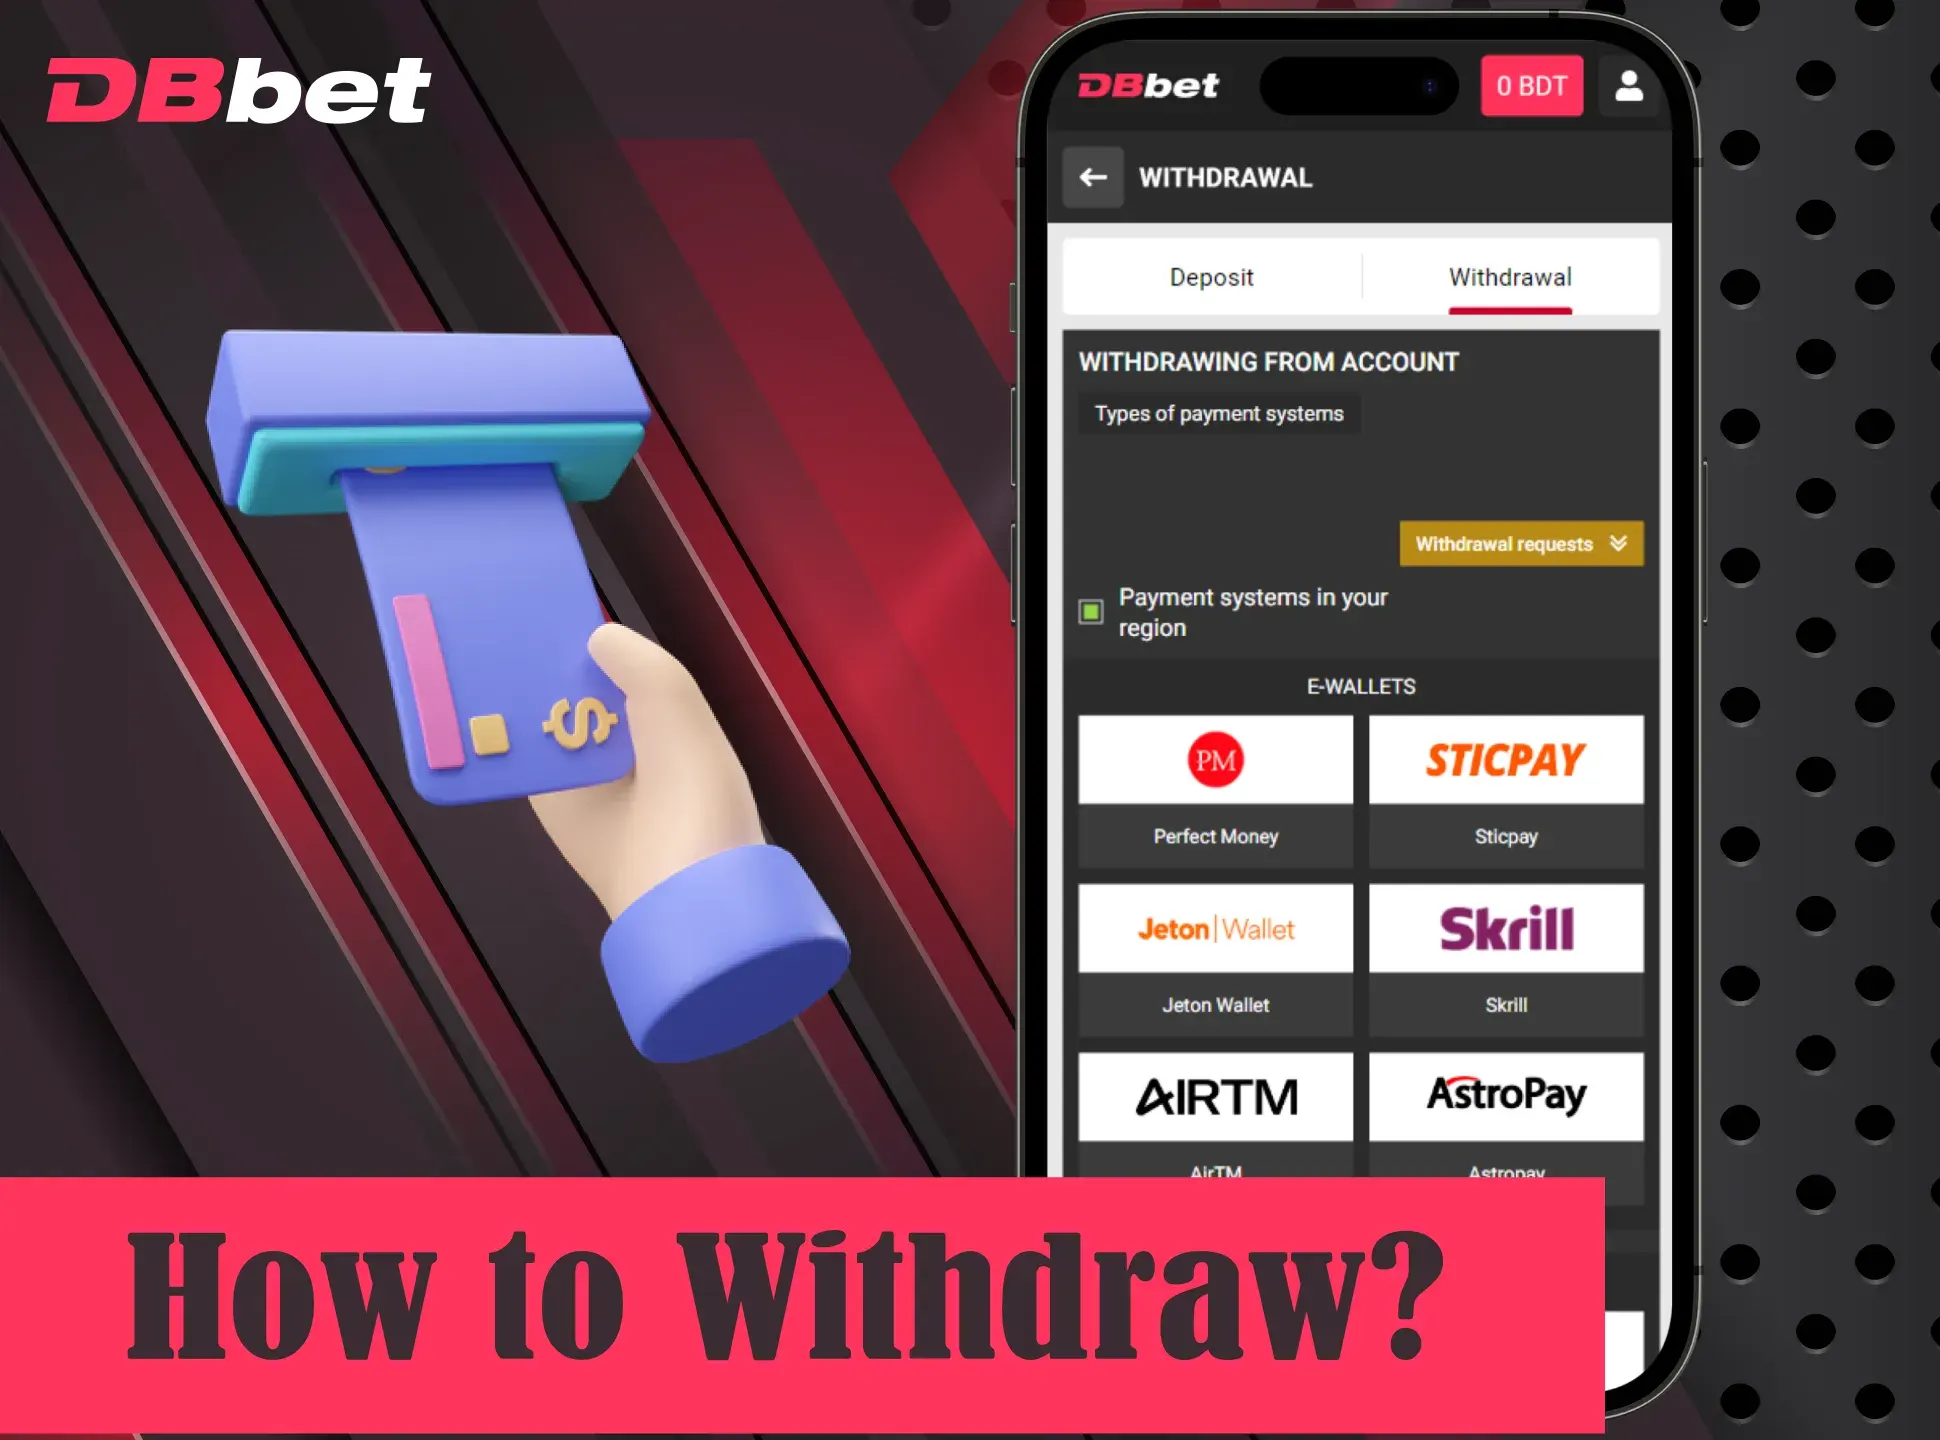 Withdraw money without any problems by using DBbet app.